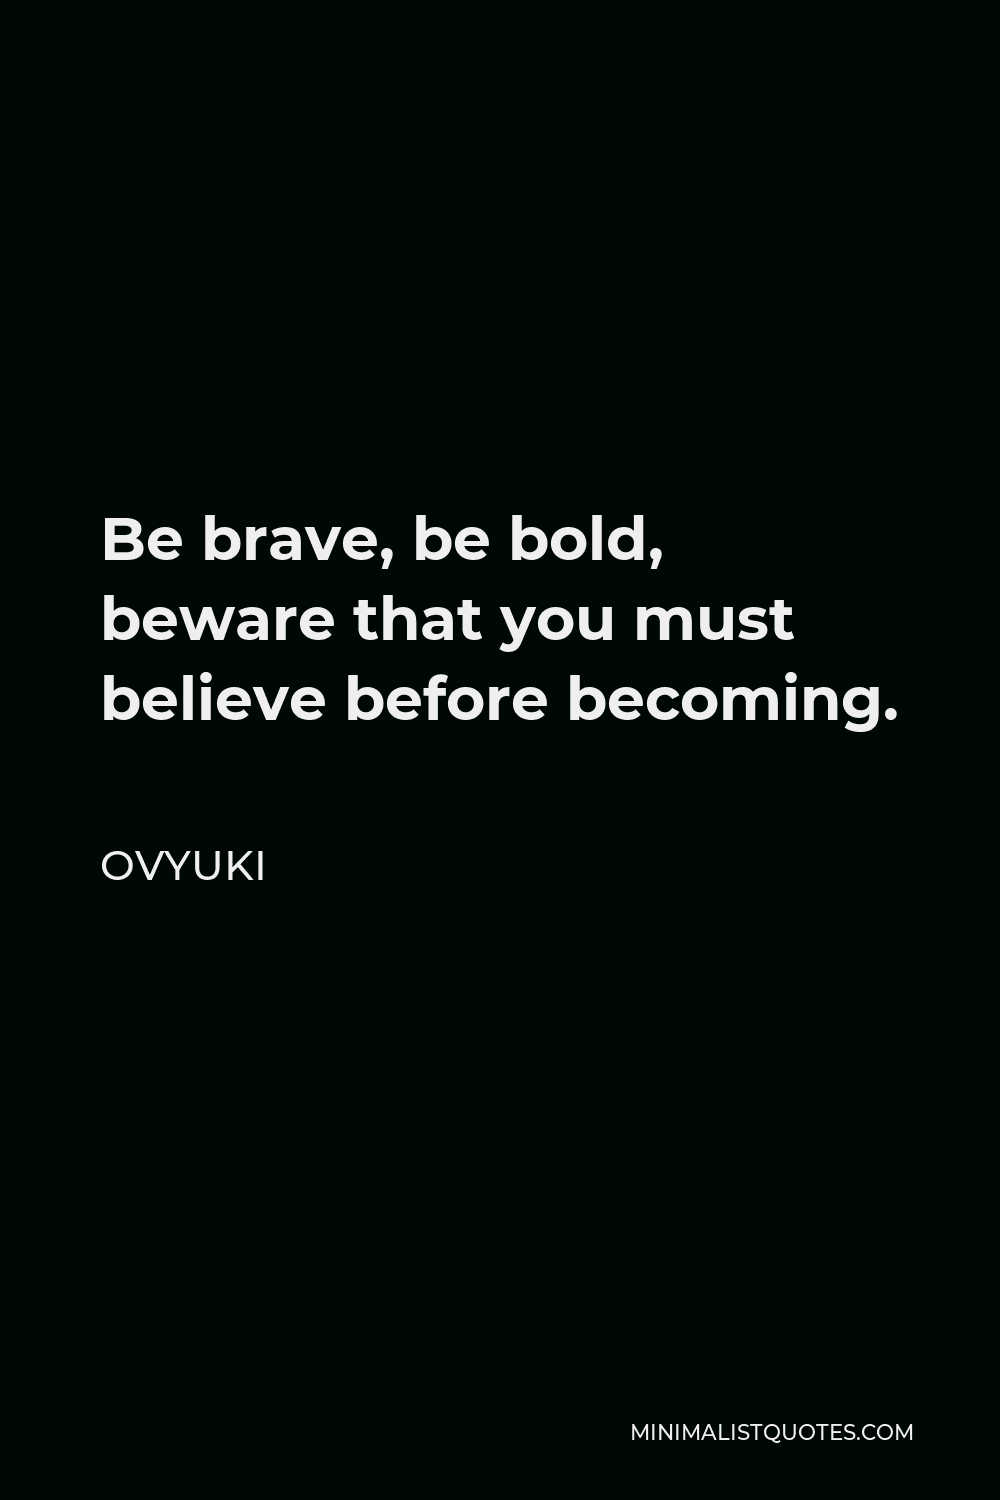 Ovyuki Quote - Be brave, be bold, beware that you must believe before becoming.